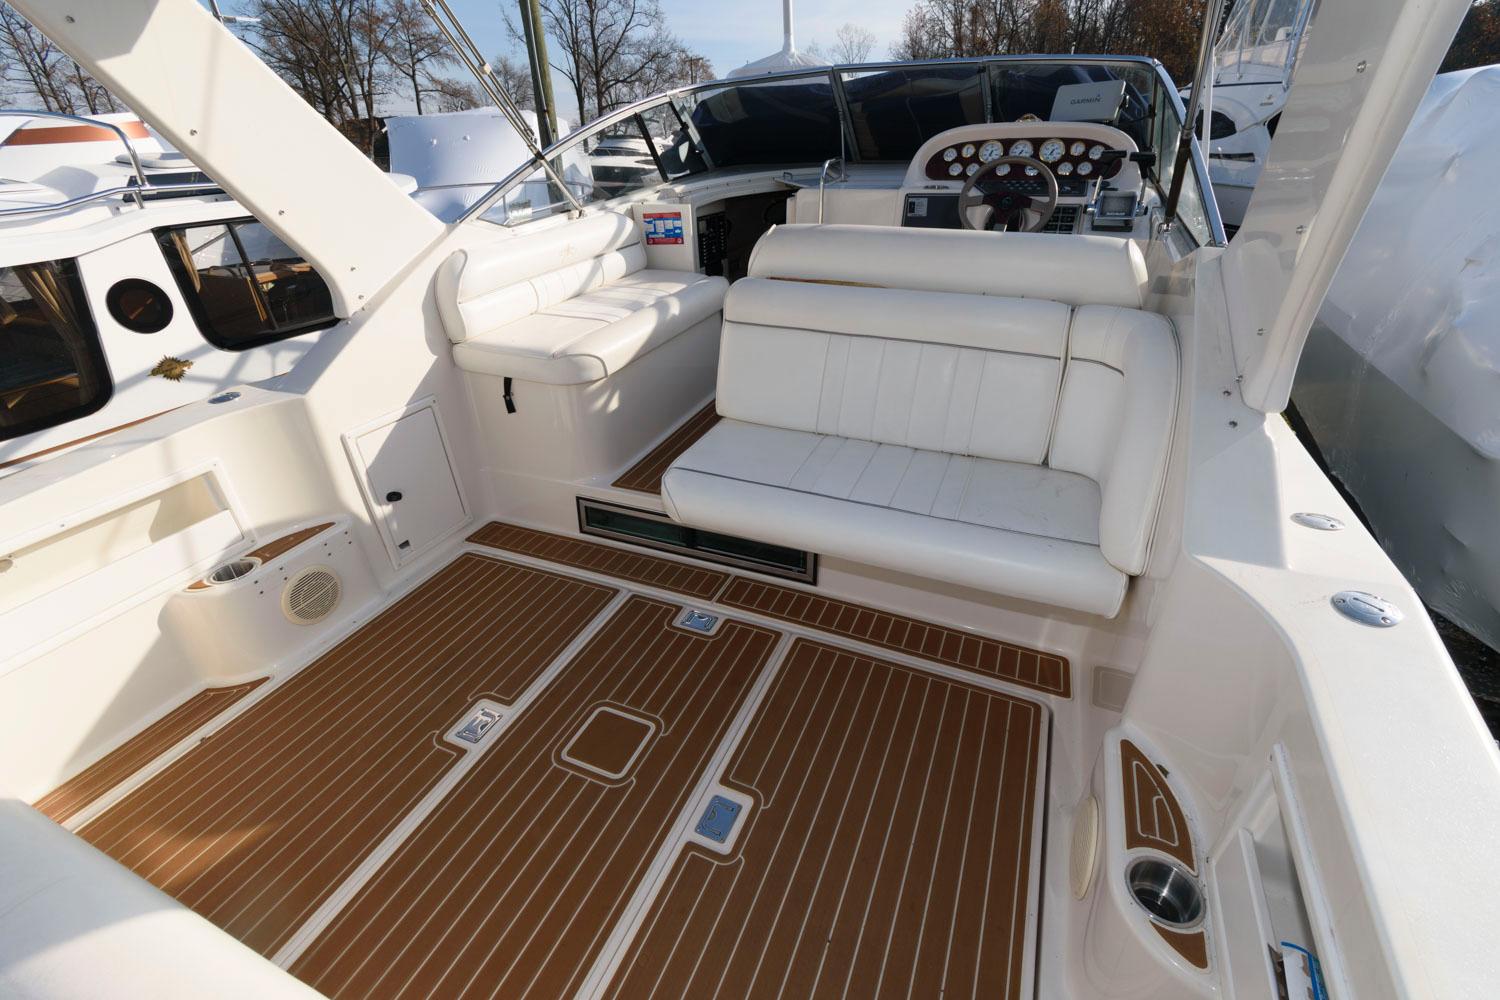 M 6678 RD Knot 10 Yacht Sales